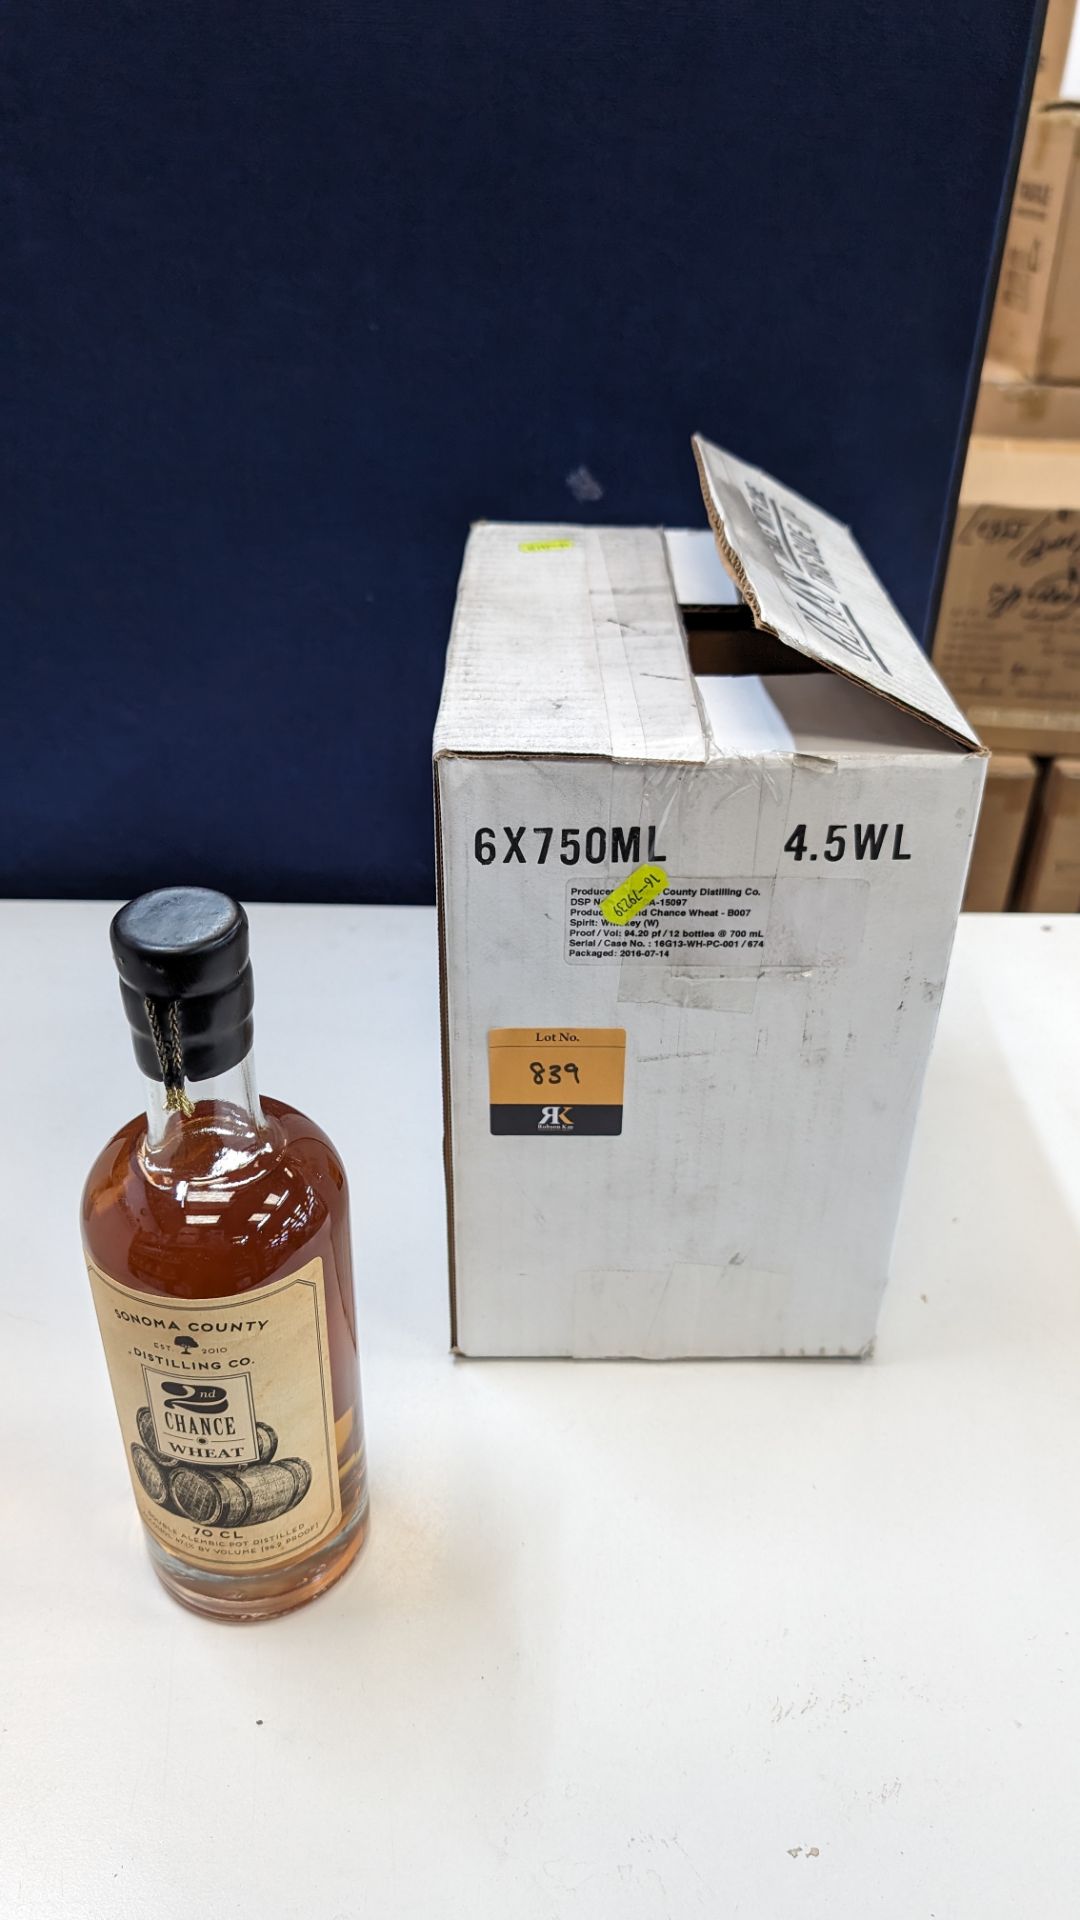 6 off 700ml bottles of Sonoma County 2nd Chance Wheat Double Alembic Pot Distilled Whiskey. In white